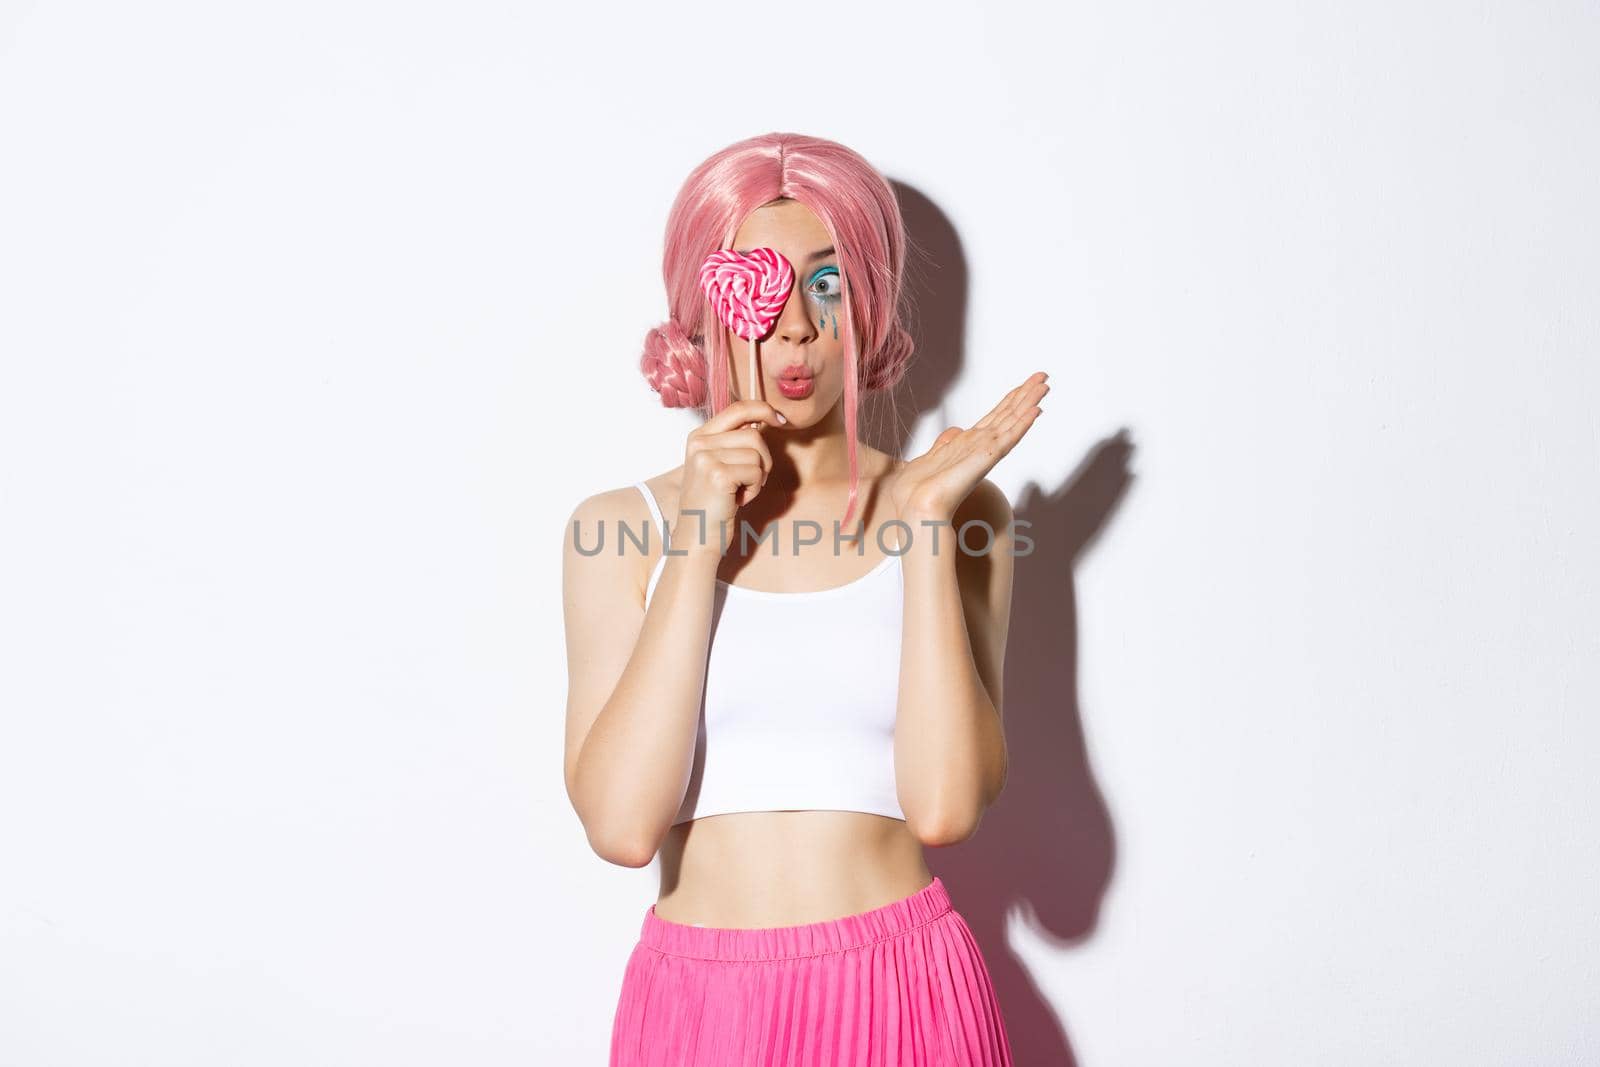 Portrait of attractive girl in pink wig holding cute candy over eye and pouting, wearing fairy costume on halloween, standing over white background.